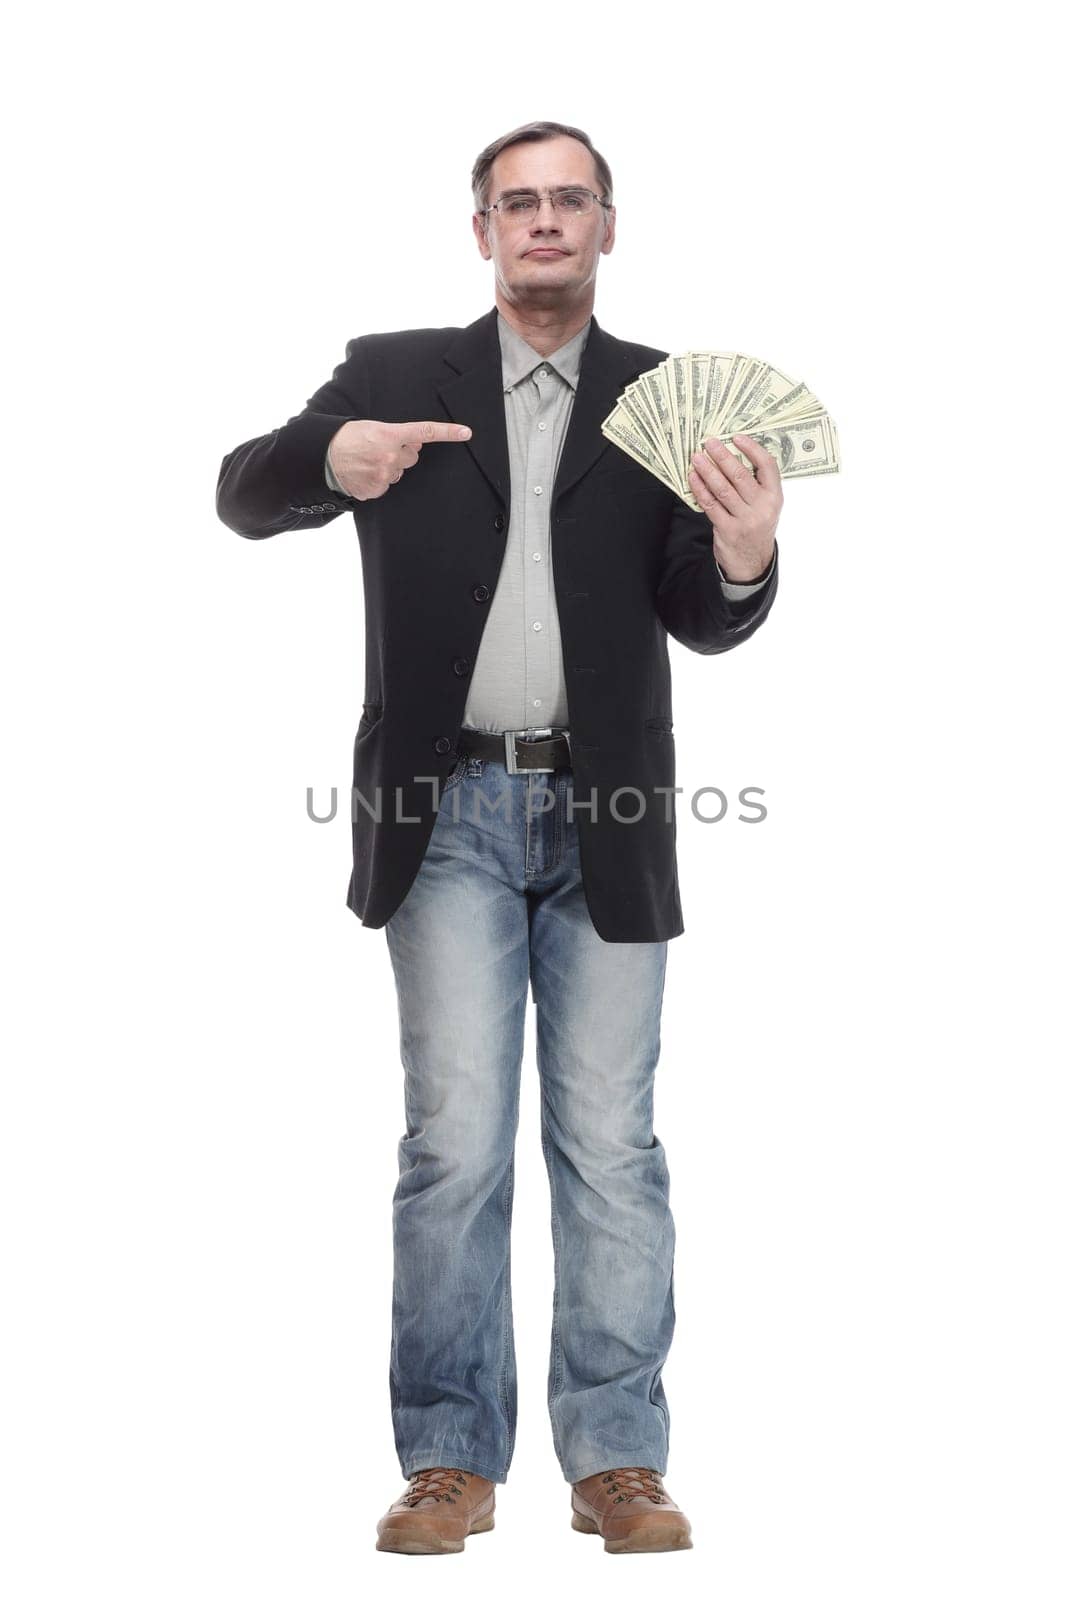 in full growth. serious business man with dollar bills. isolated on a white background.